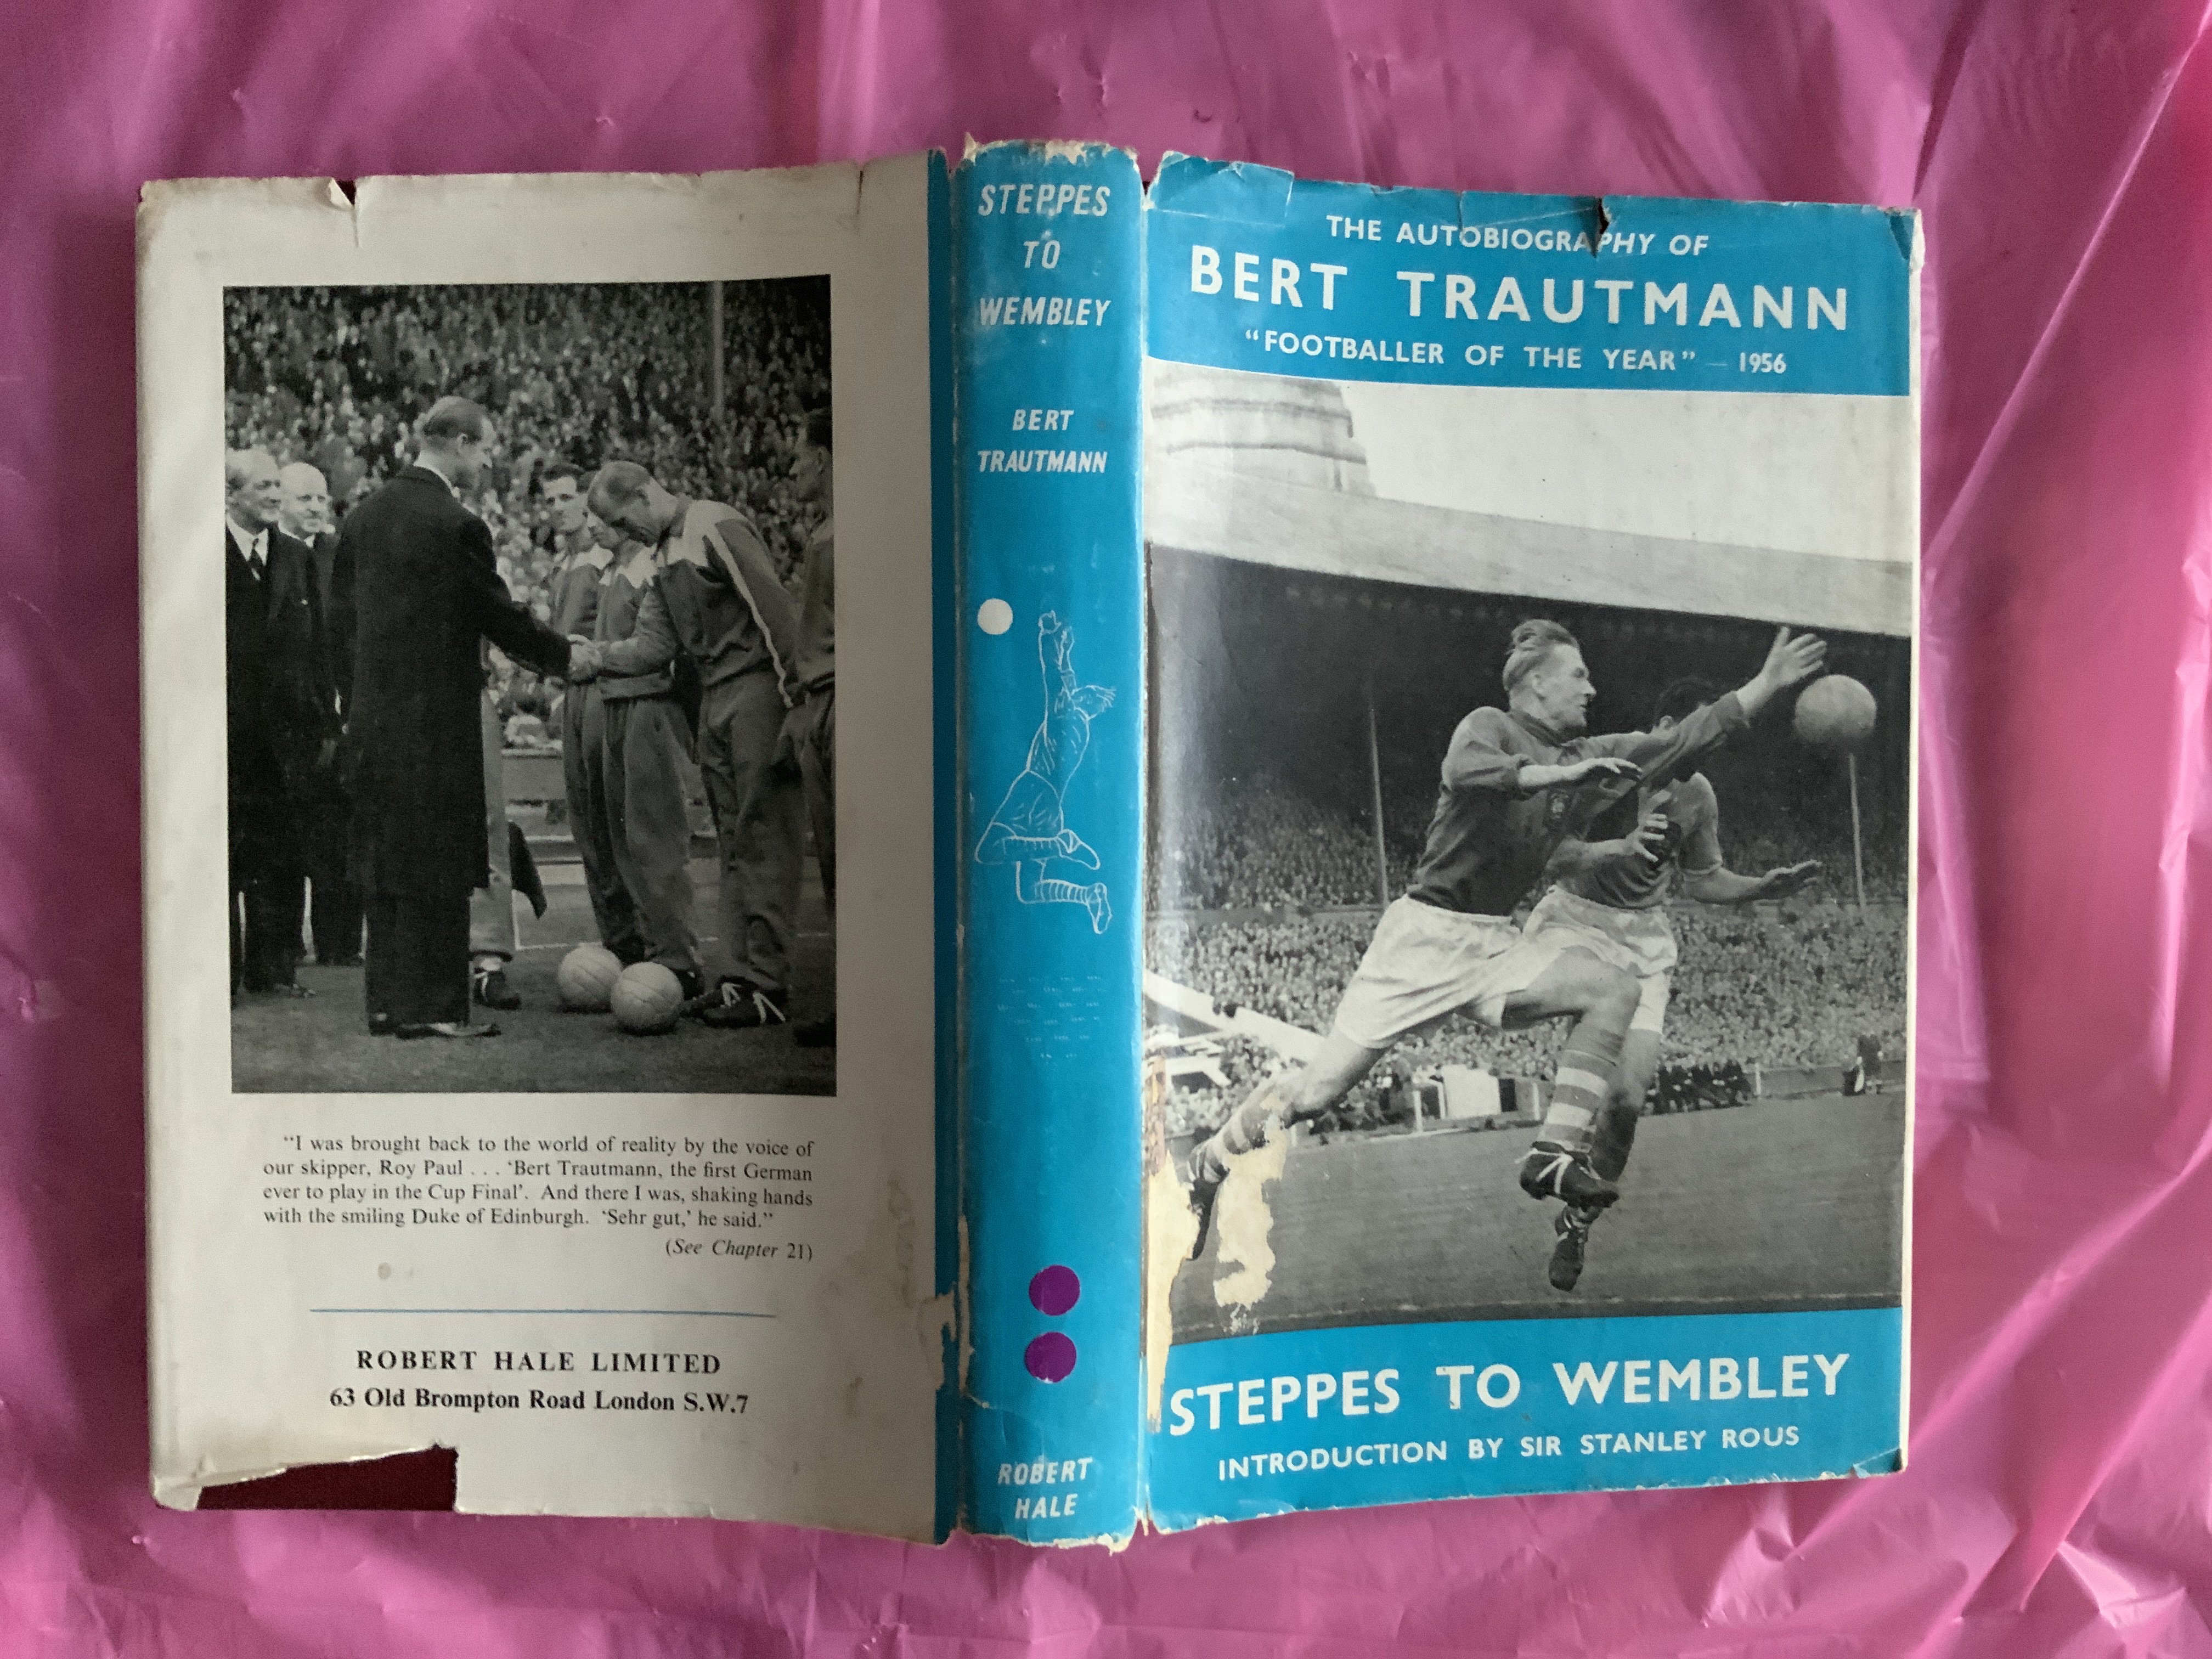 Bert Trautmann Manchester City Signed Football Book: 1956 autobiography Steppes To Wembley with